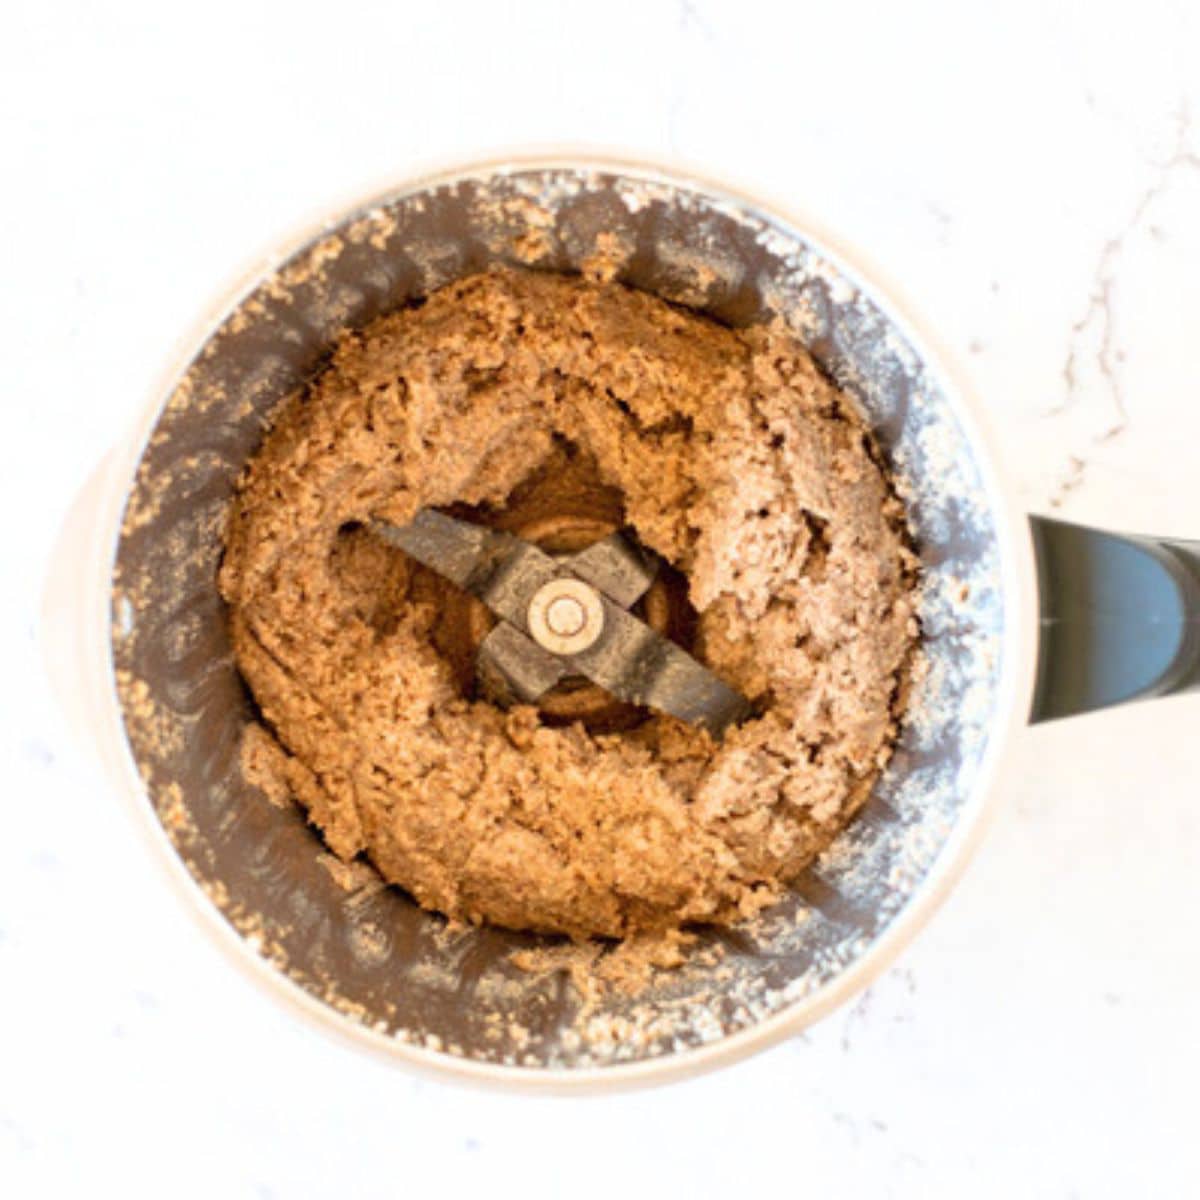 Thermomix almond butter in a thermomix bowl.